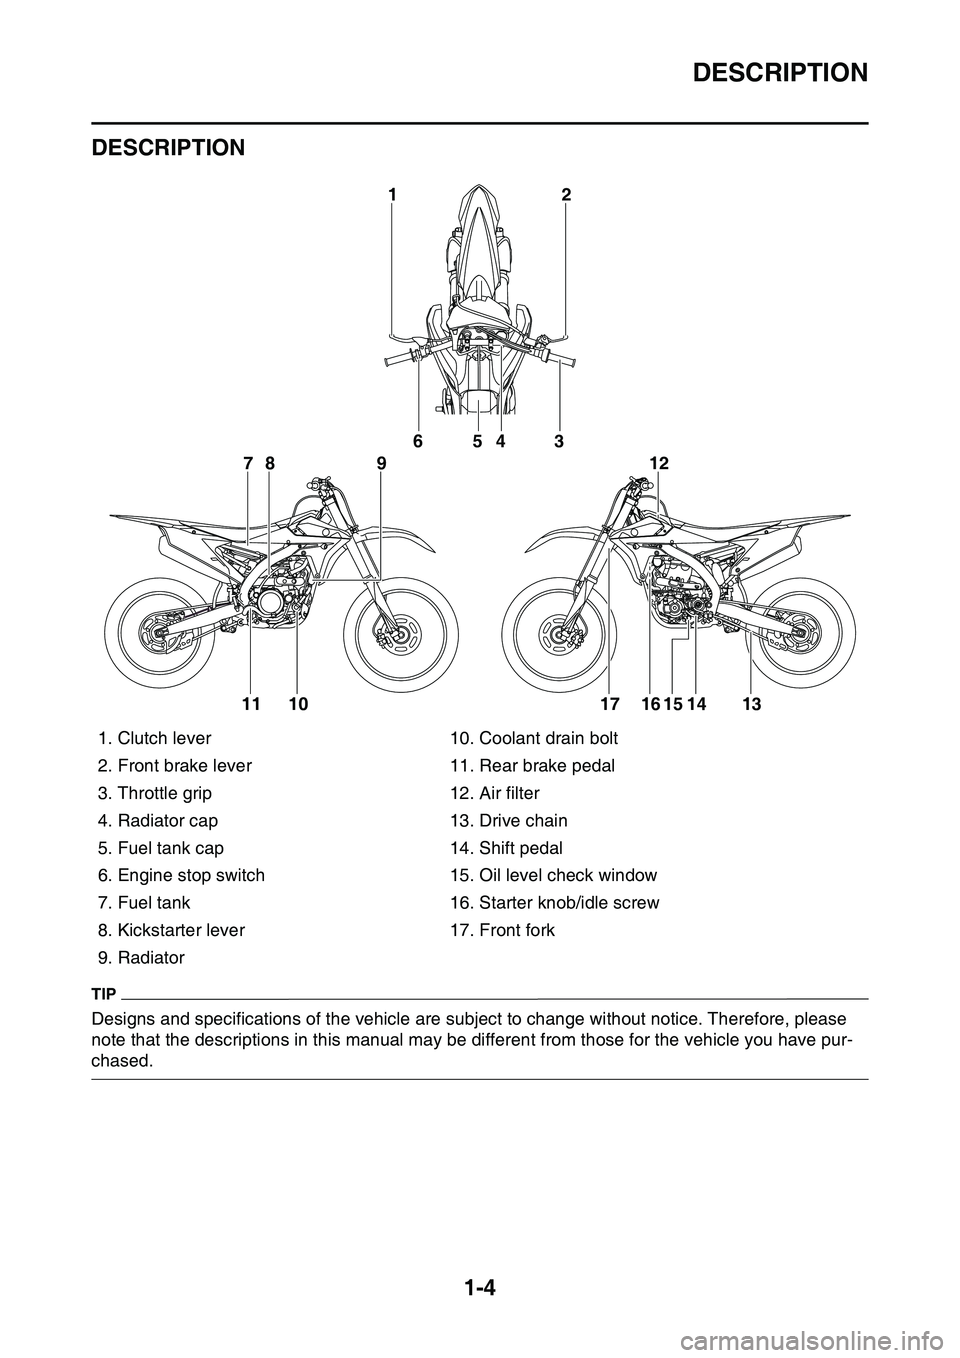 YAMAHA YZ450F 2014 User Guide DESCRIPTION
1-4
EAS1SL1009
DESCRIPTION
TIP
Designs and specifications of the vehicle are subject to change without notice. Therefore, please 
note that the descriptions in this manual may be different